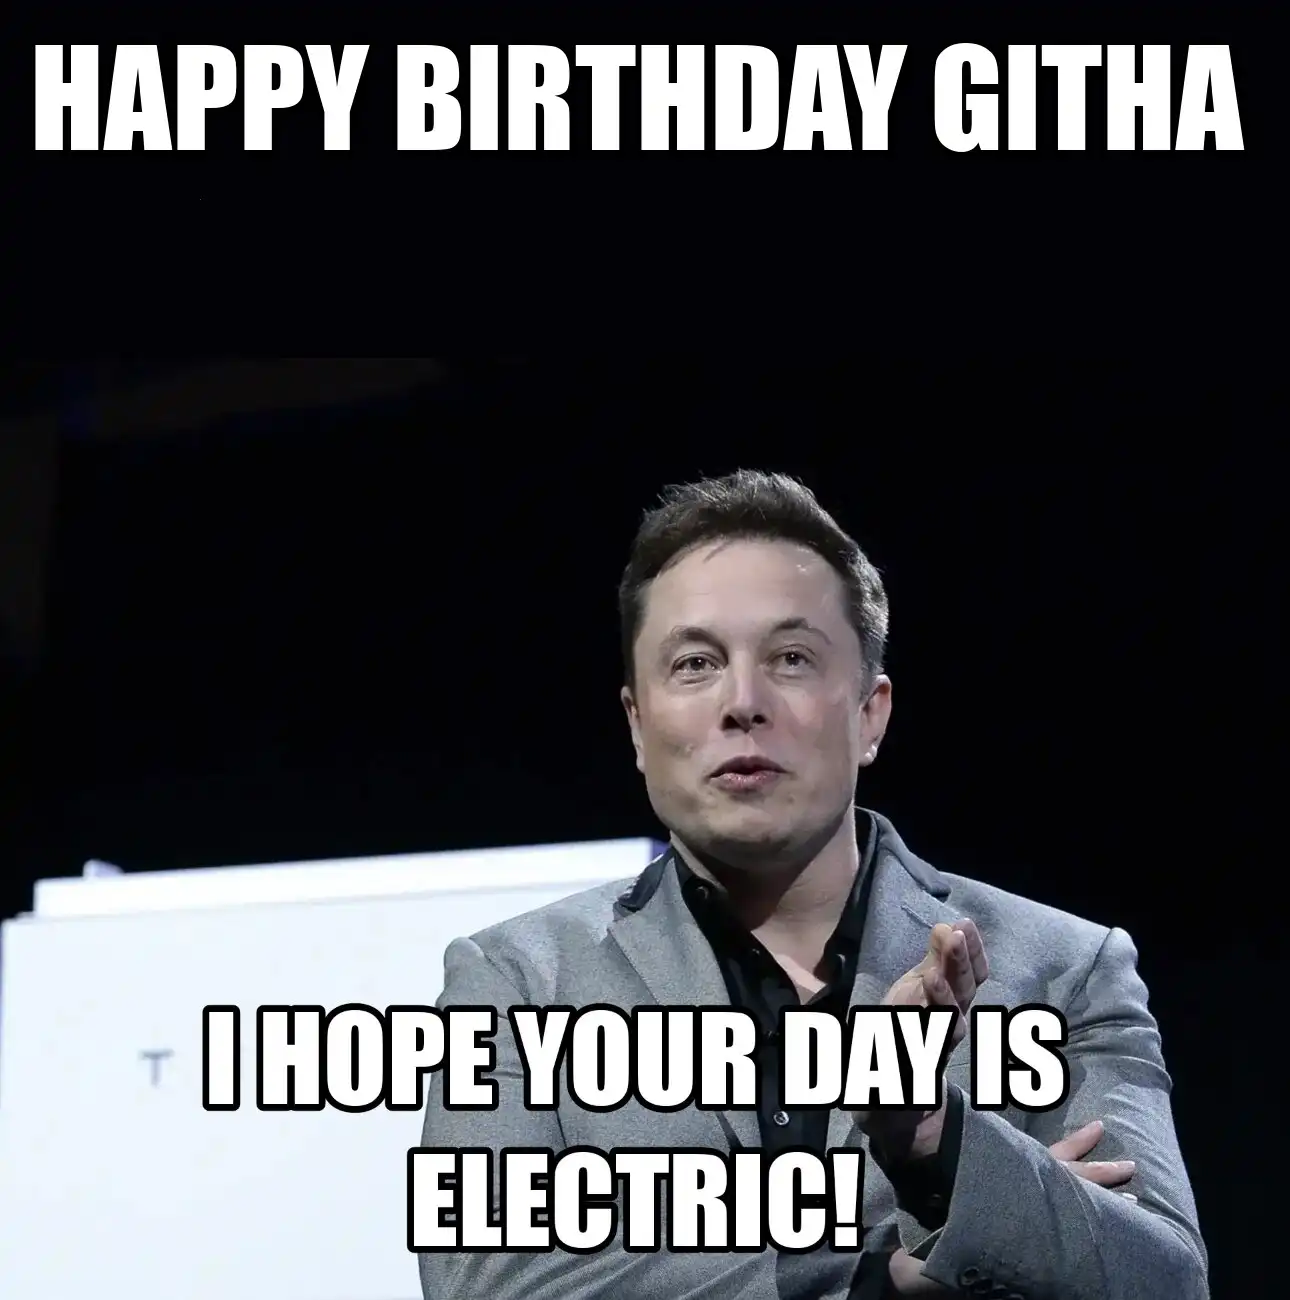 Happy Birthday Githa I Hope Your Day Is Electric Meme